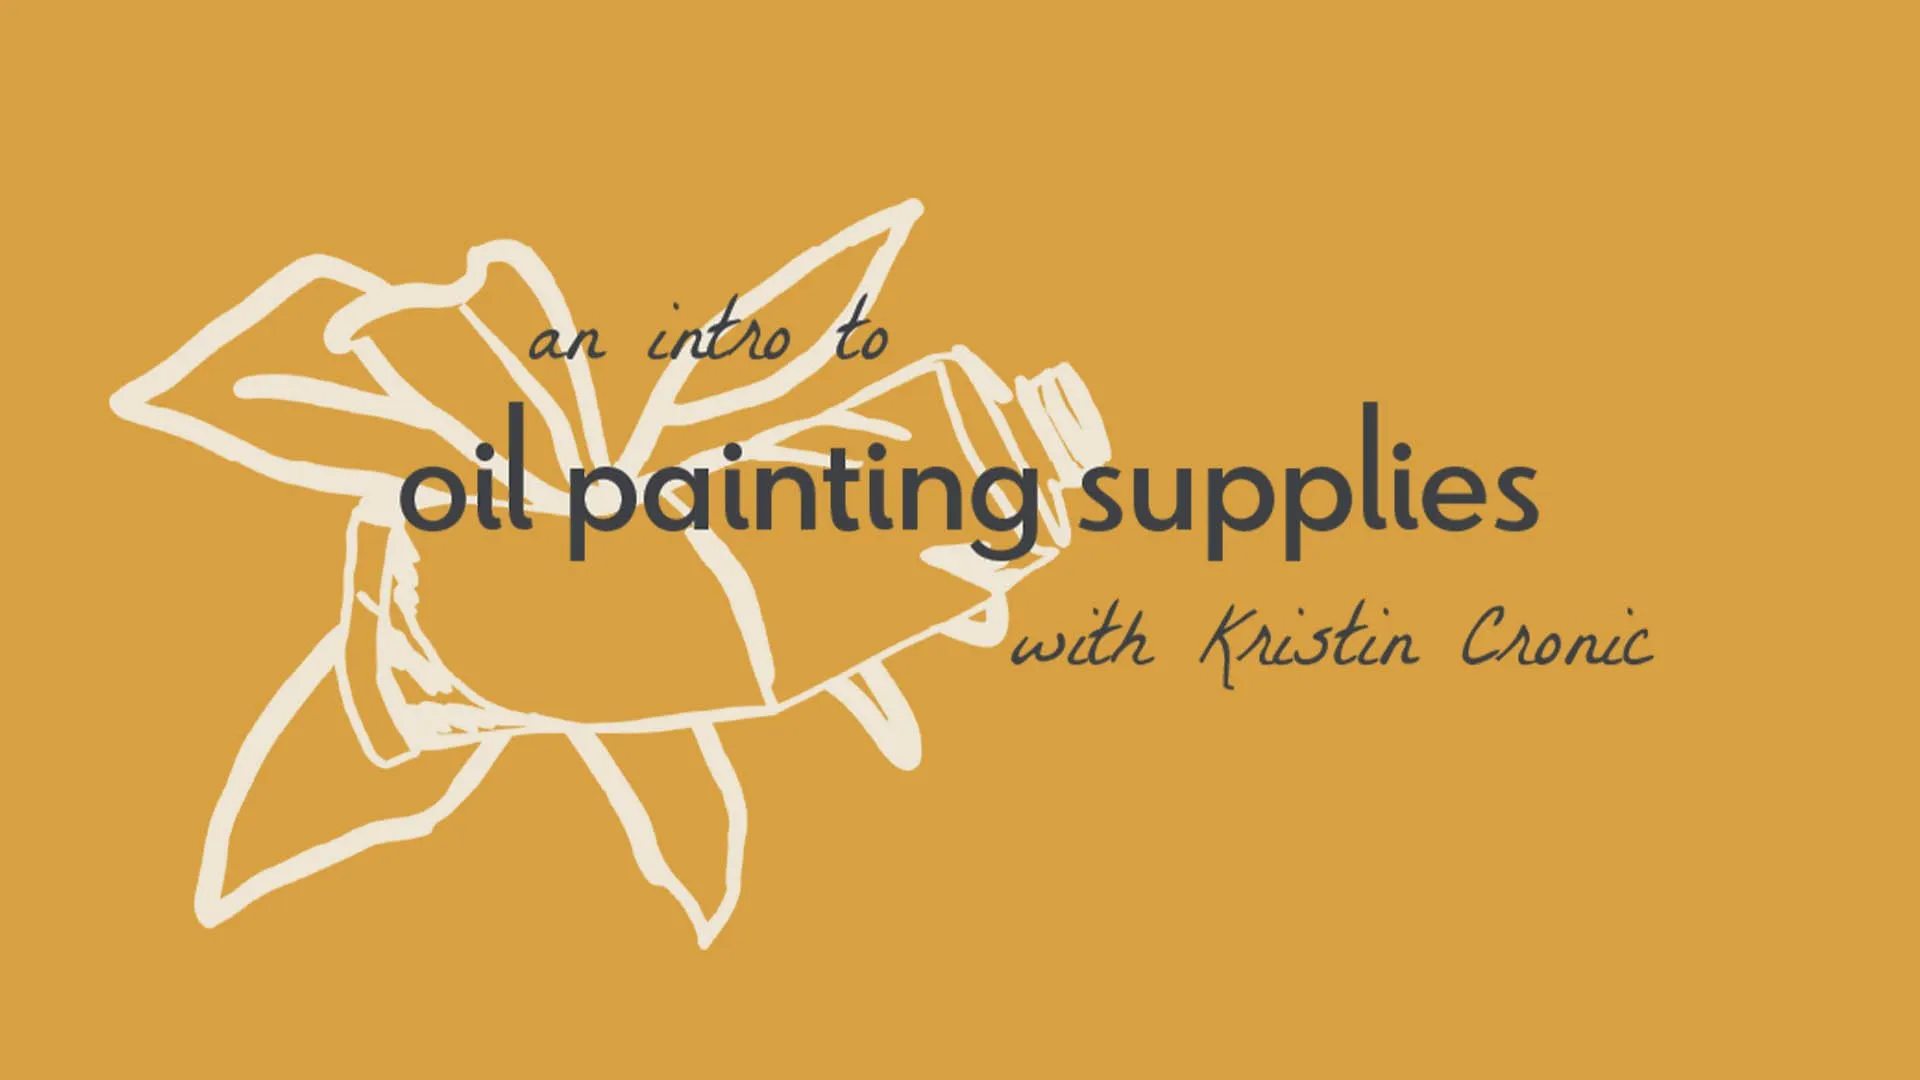 Get To Know Your Oil Painting Supplies